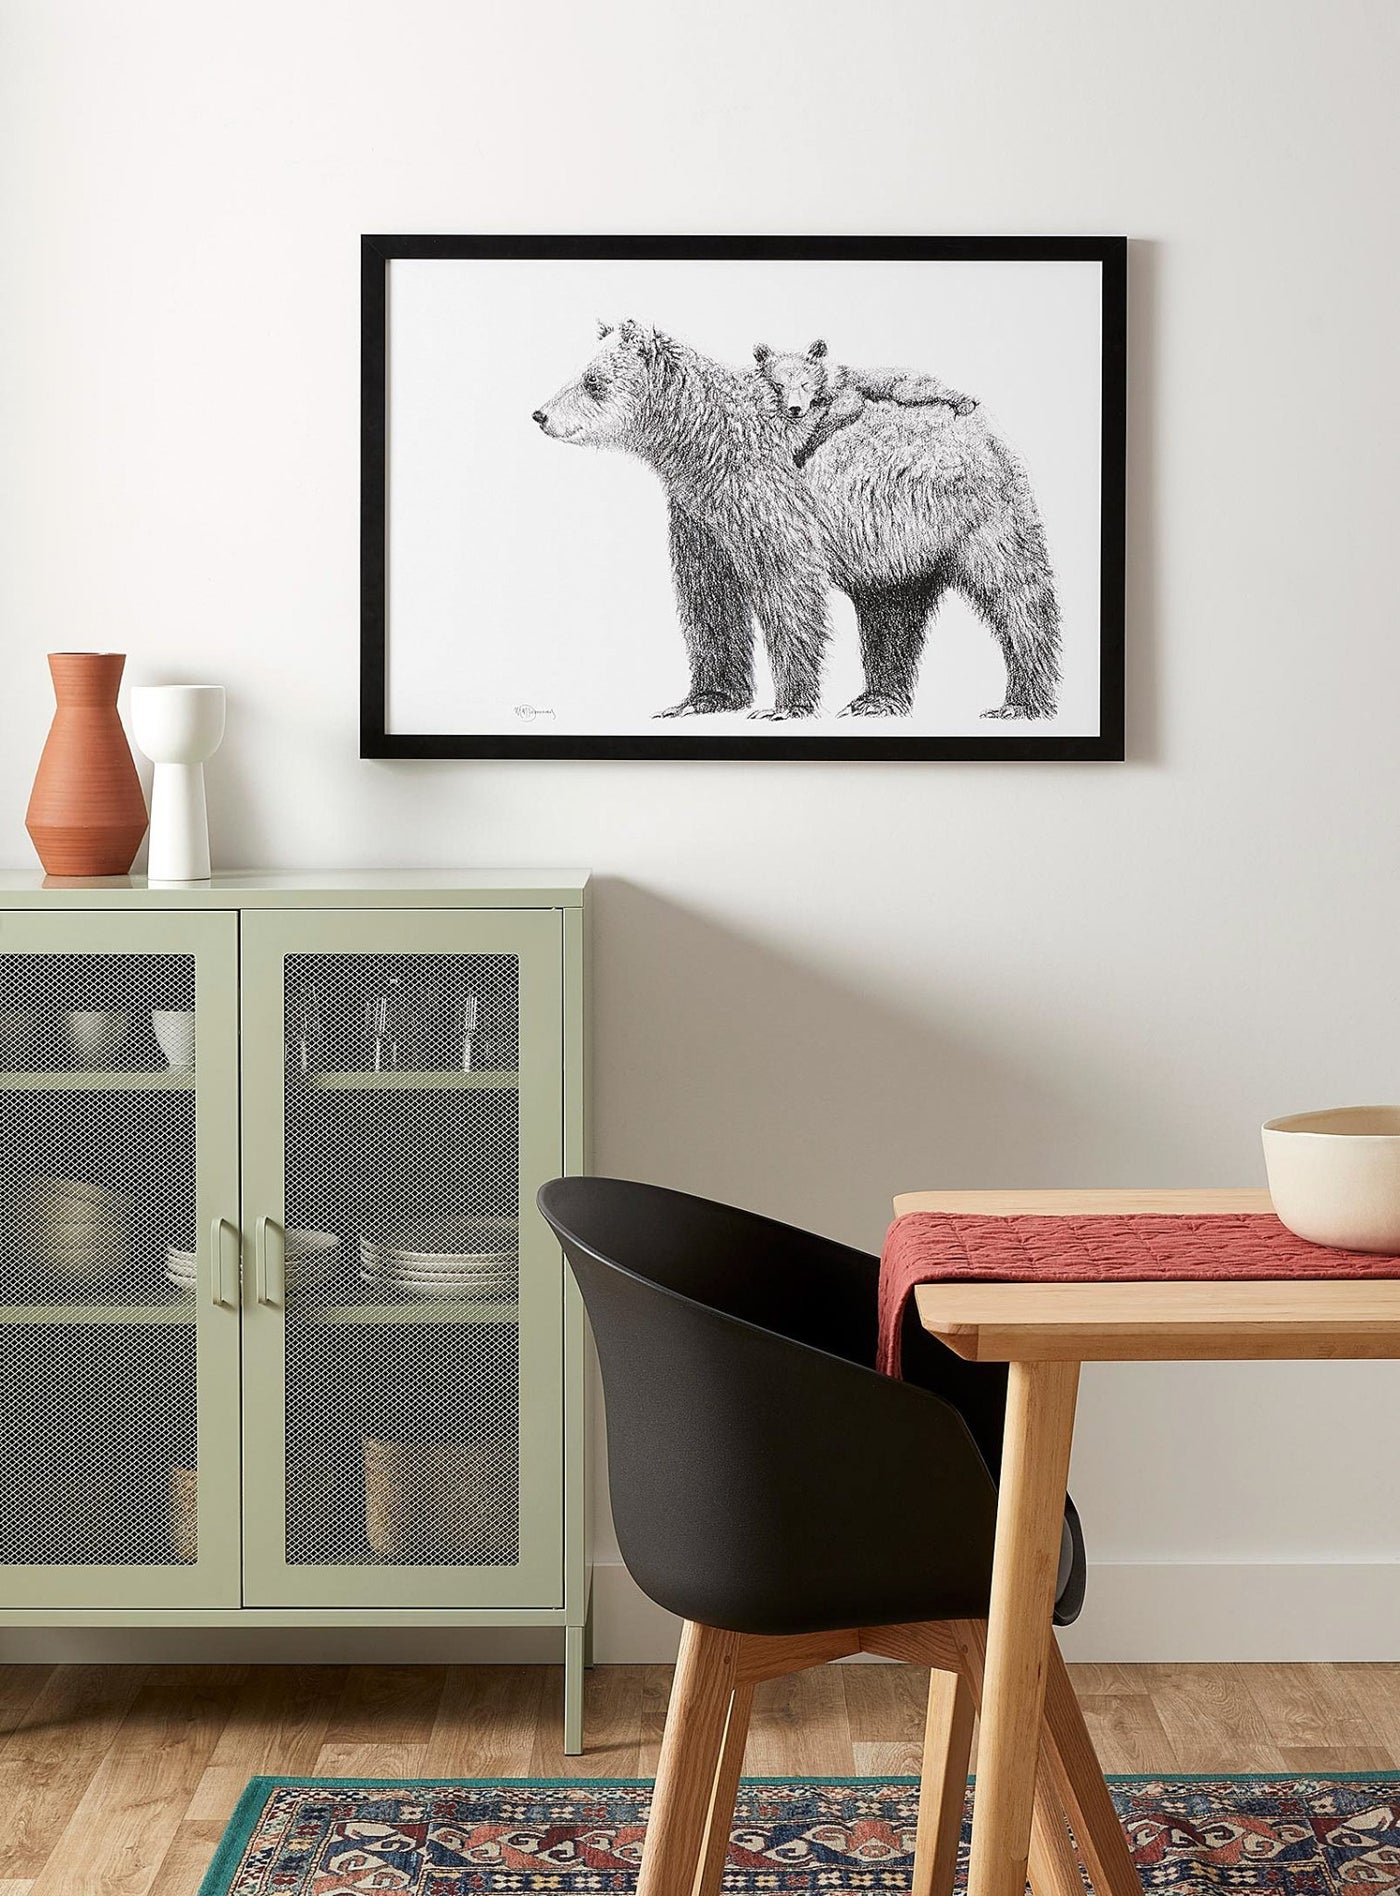 Mother Bear and cub - "Social Animal" Collection - LE NID atelier